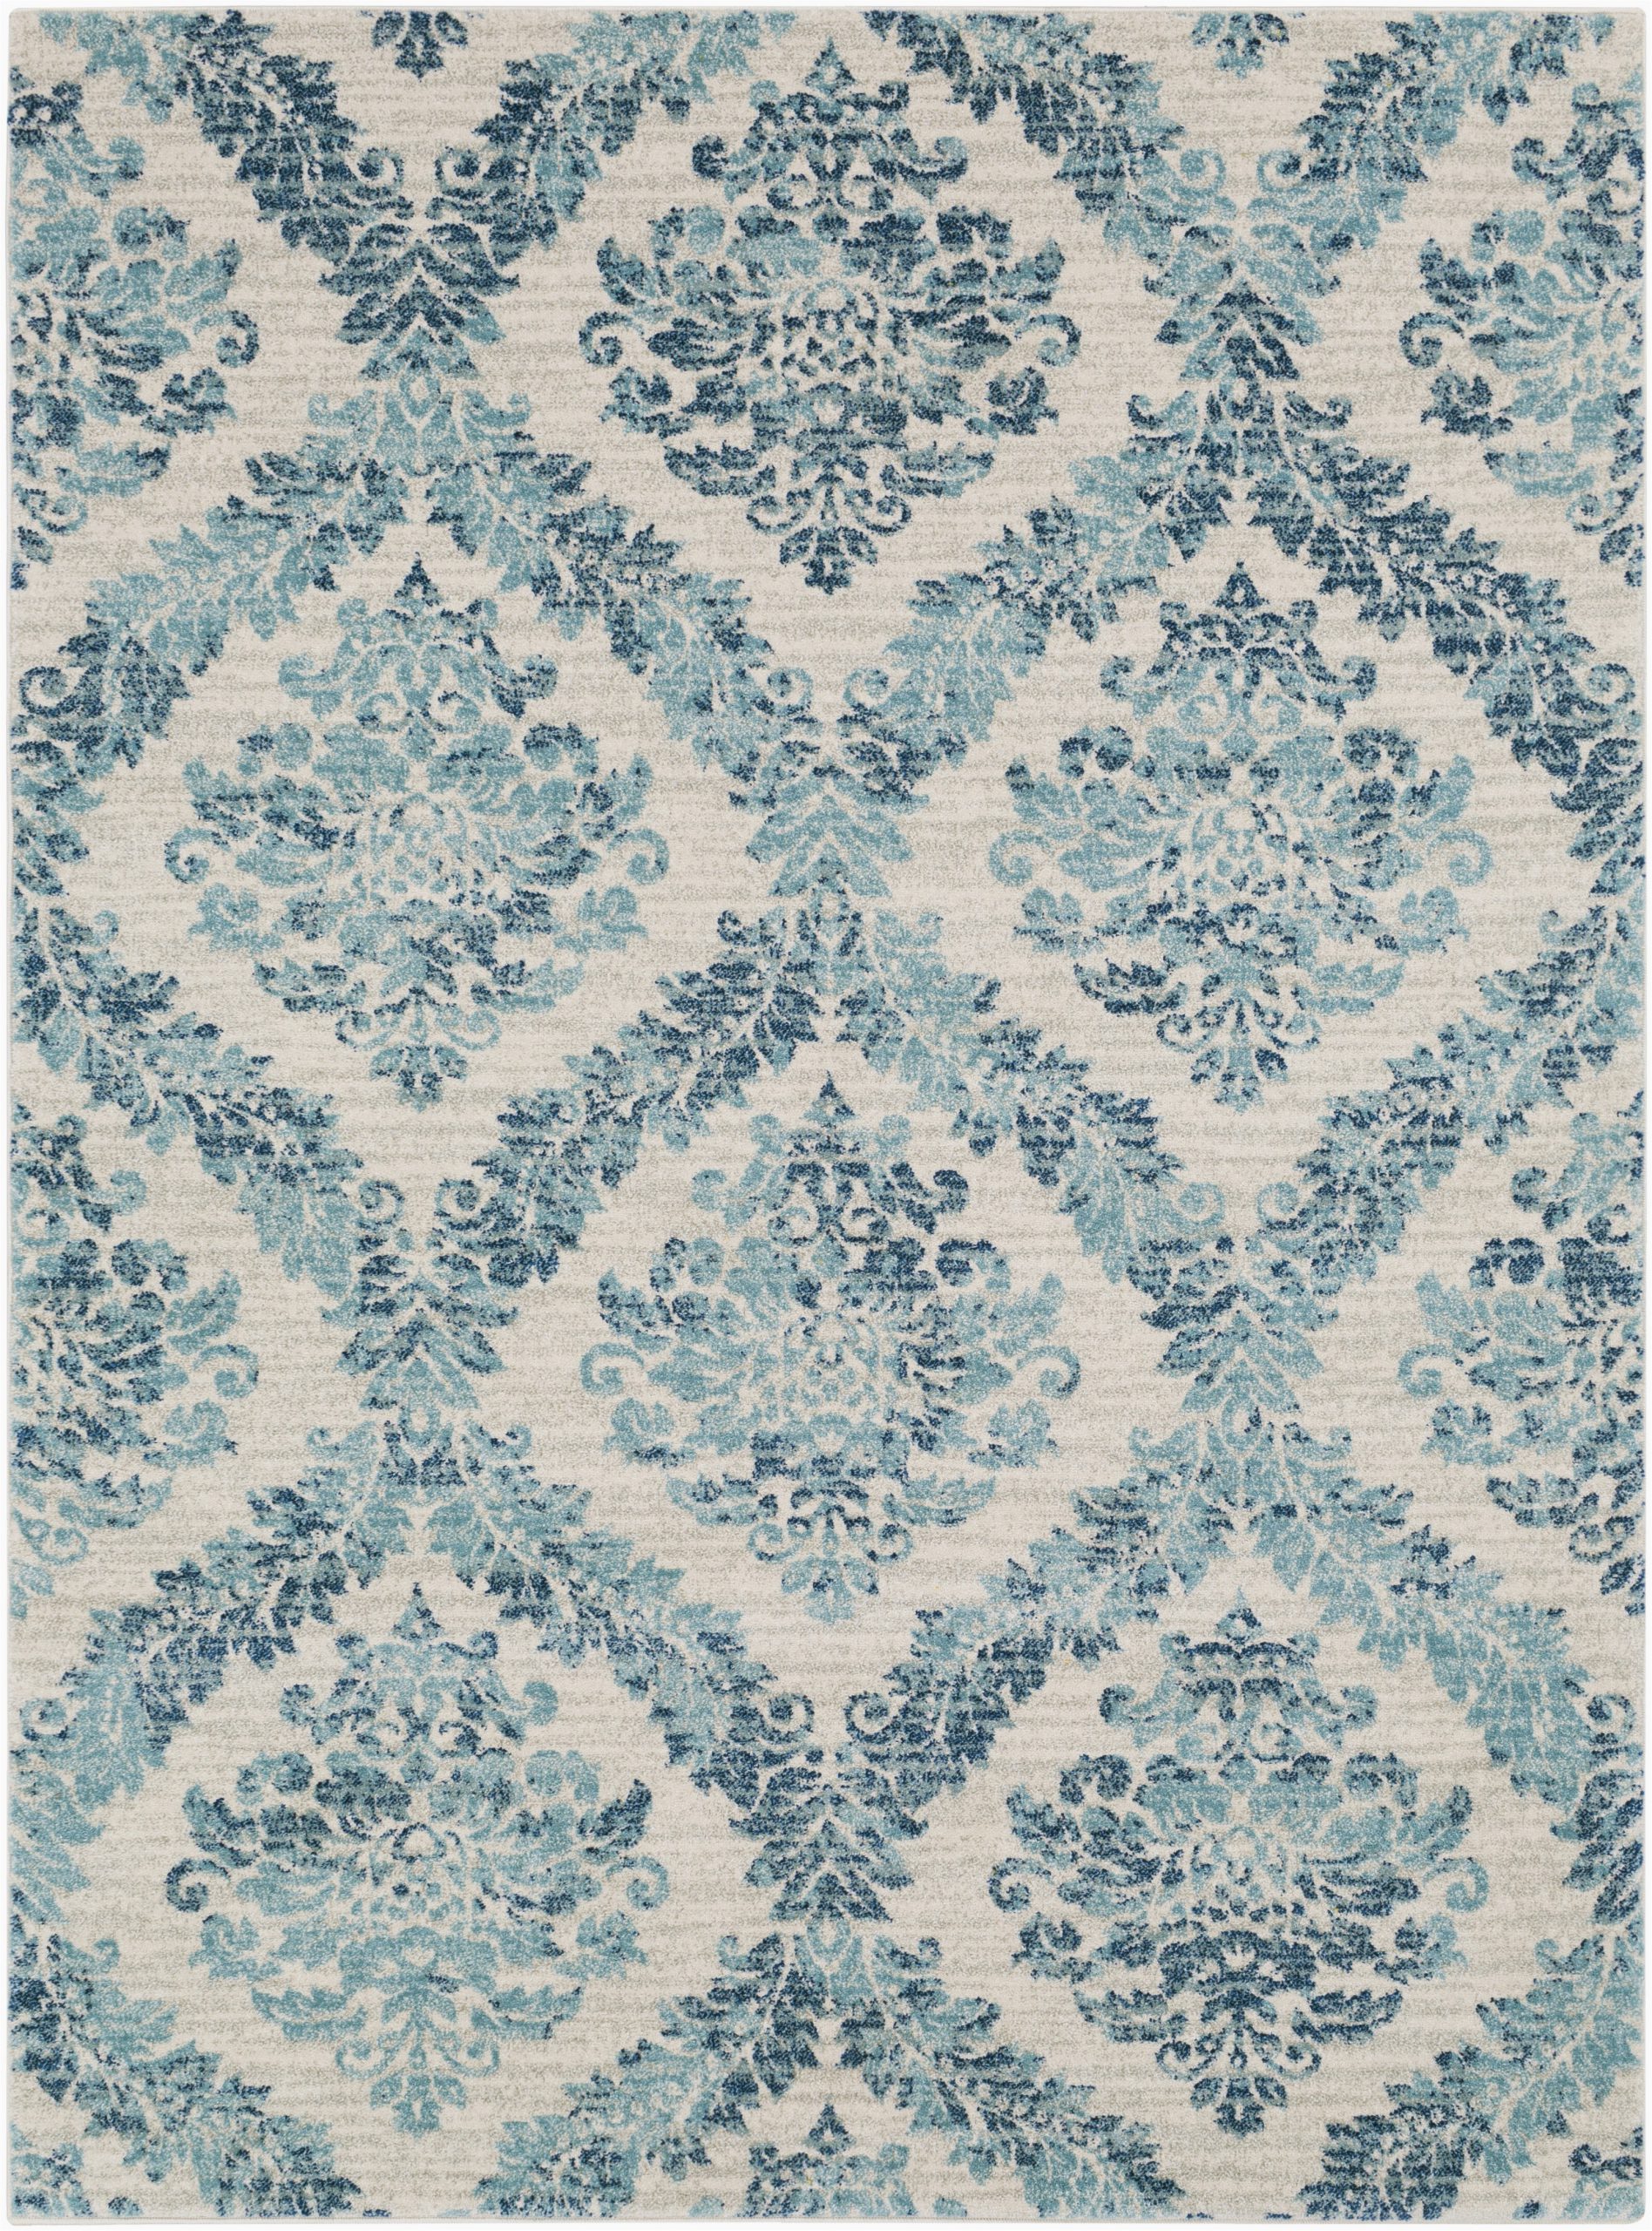 Teal and Ivory area Rugs Delana Dark Blue Teal Light Gray area Rug